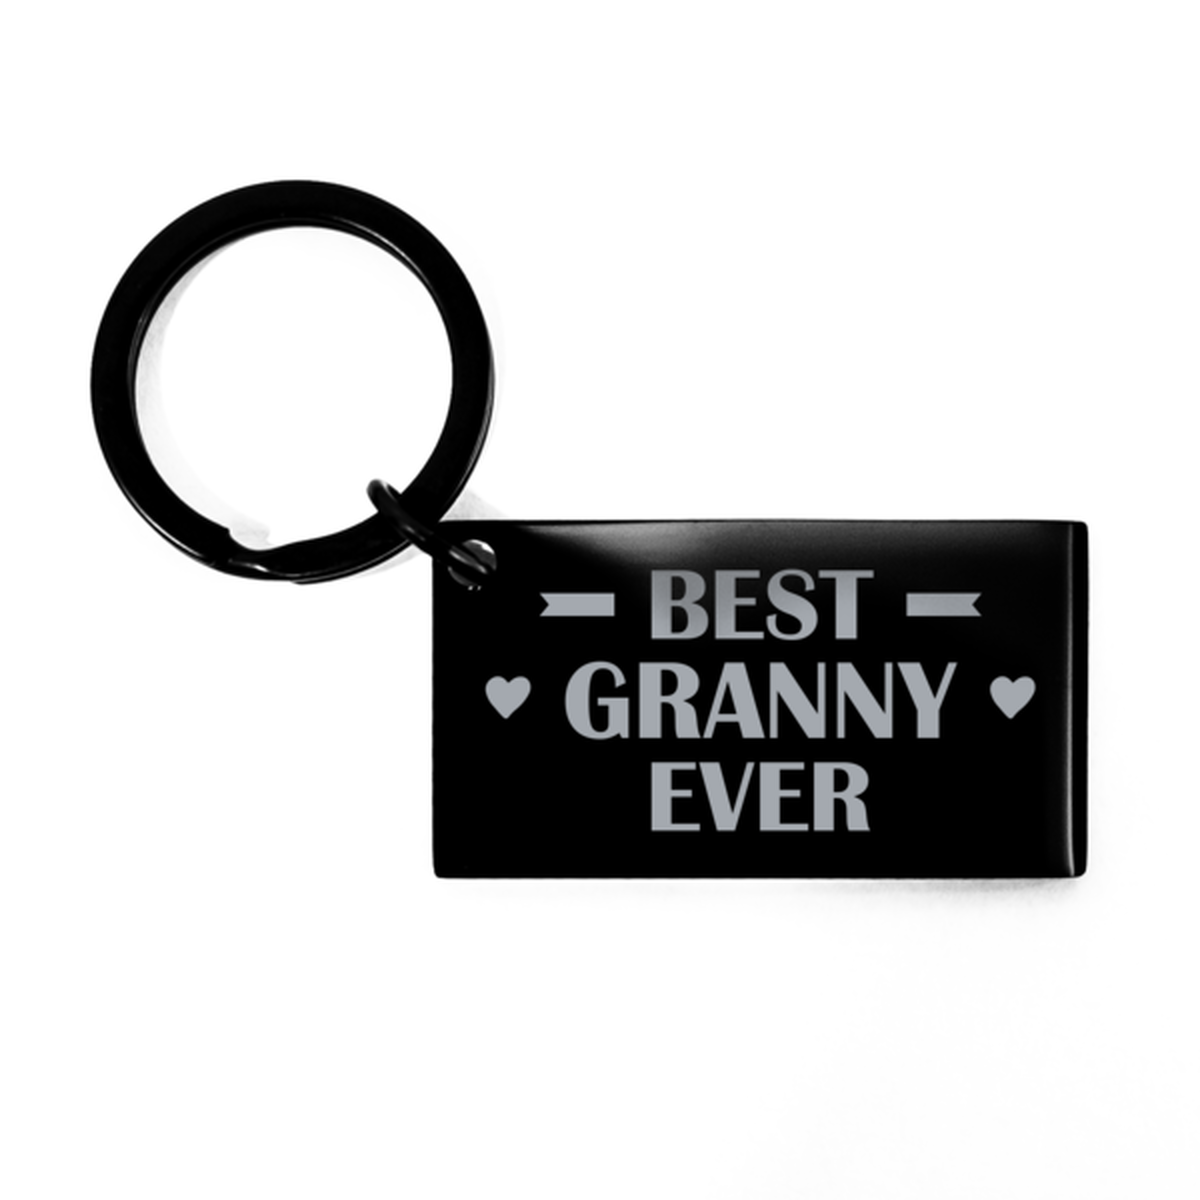 Best Granny Ever Granny Gifts, Funny Black Keychain For Granny, Birthday Engraved Keyring Presents For Women